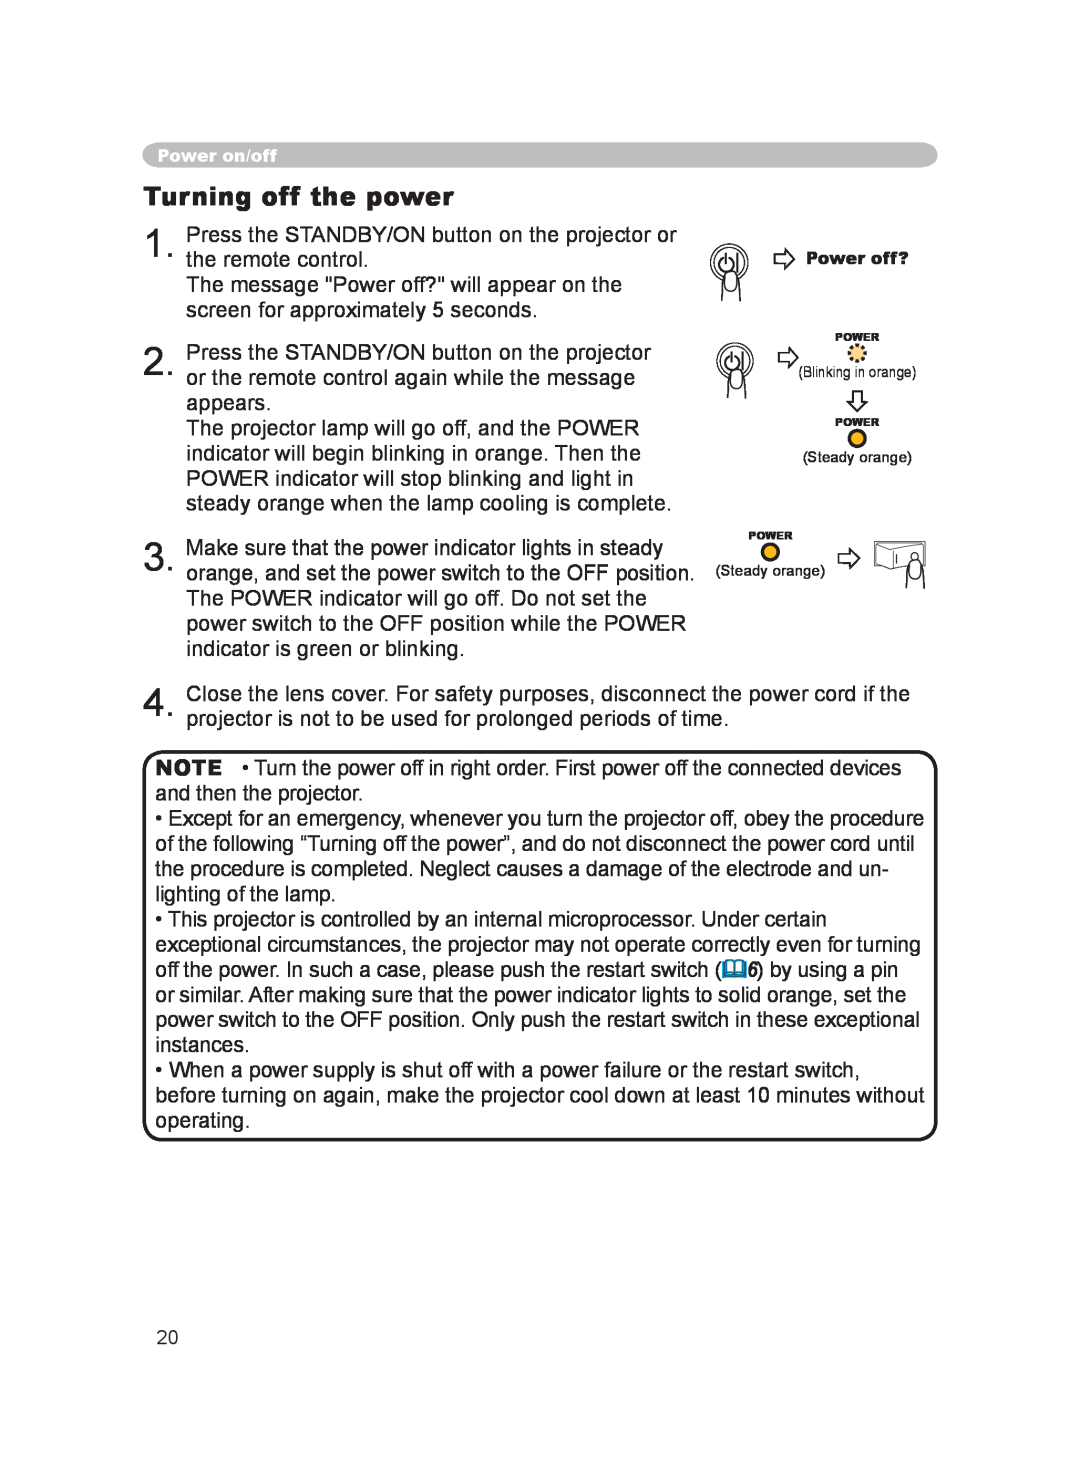 Hitachi PJ-LC9 user manual Turning off the power, Power off? 